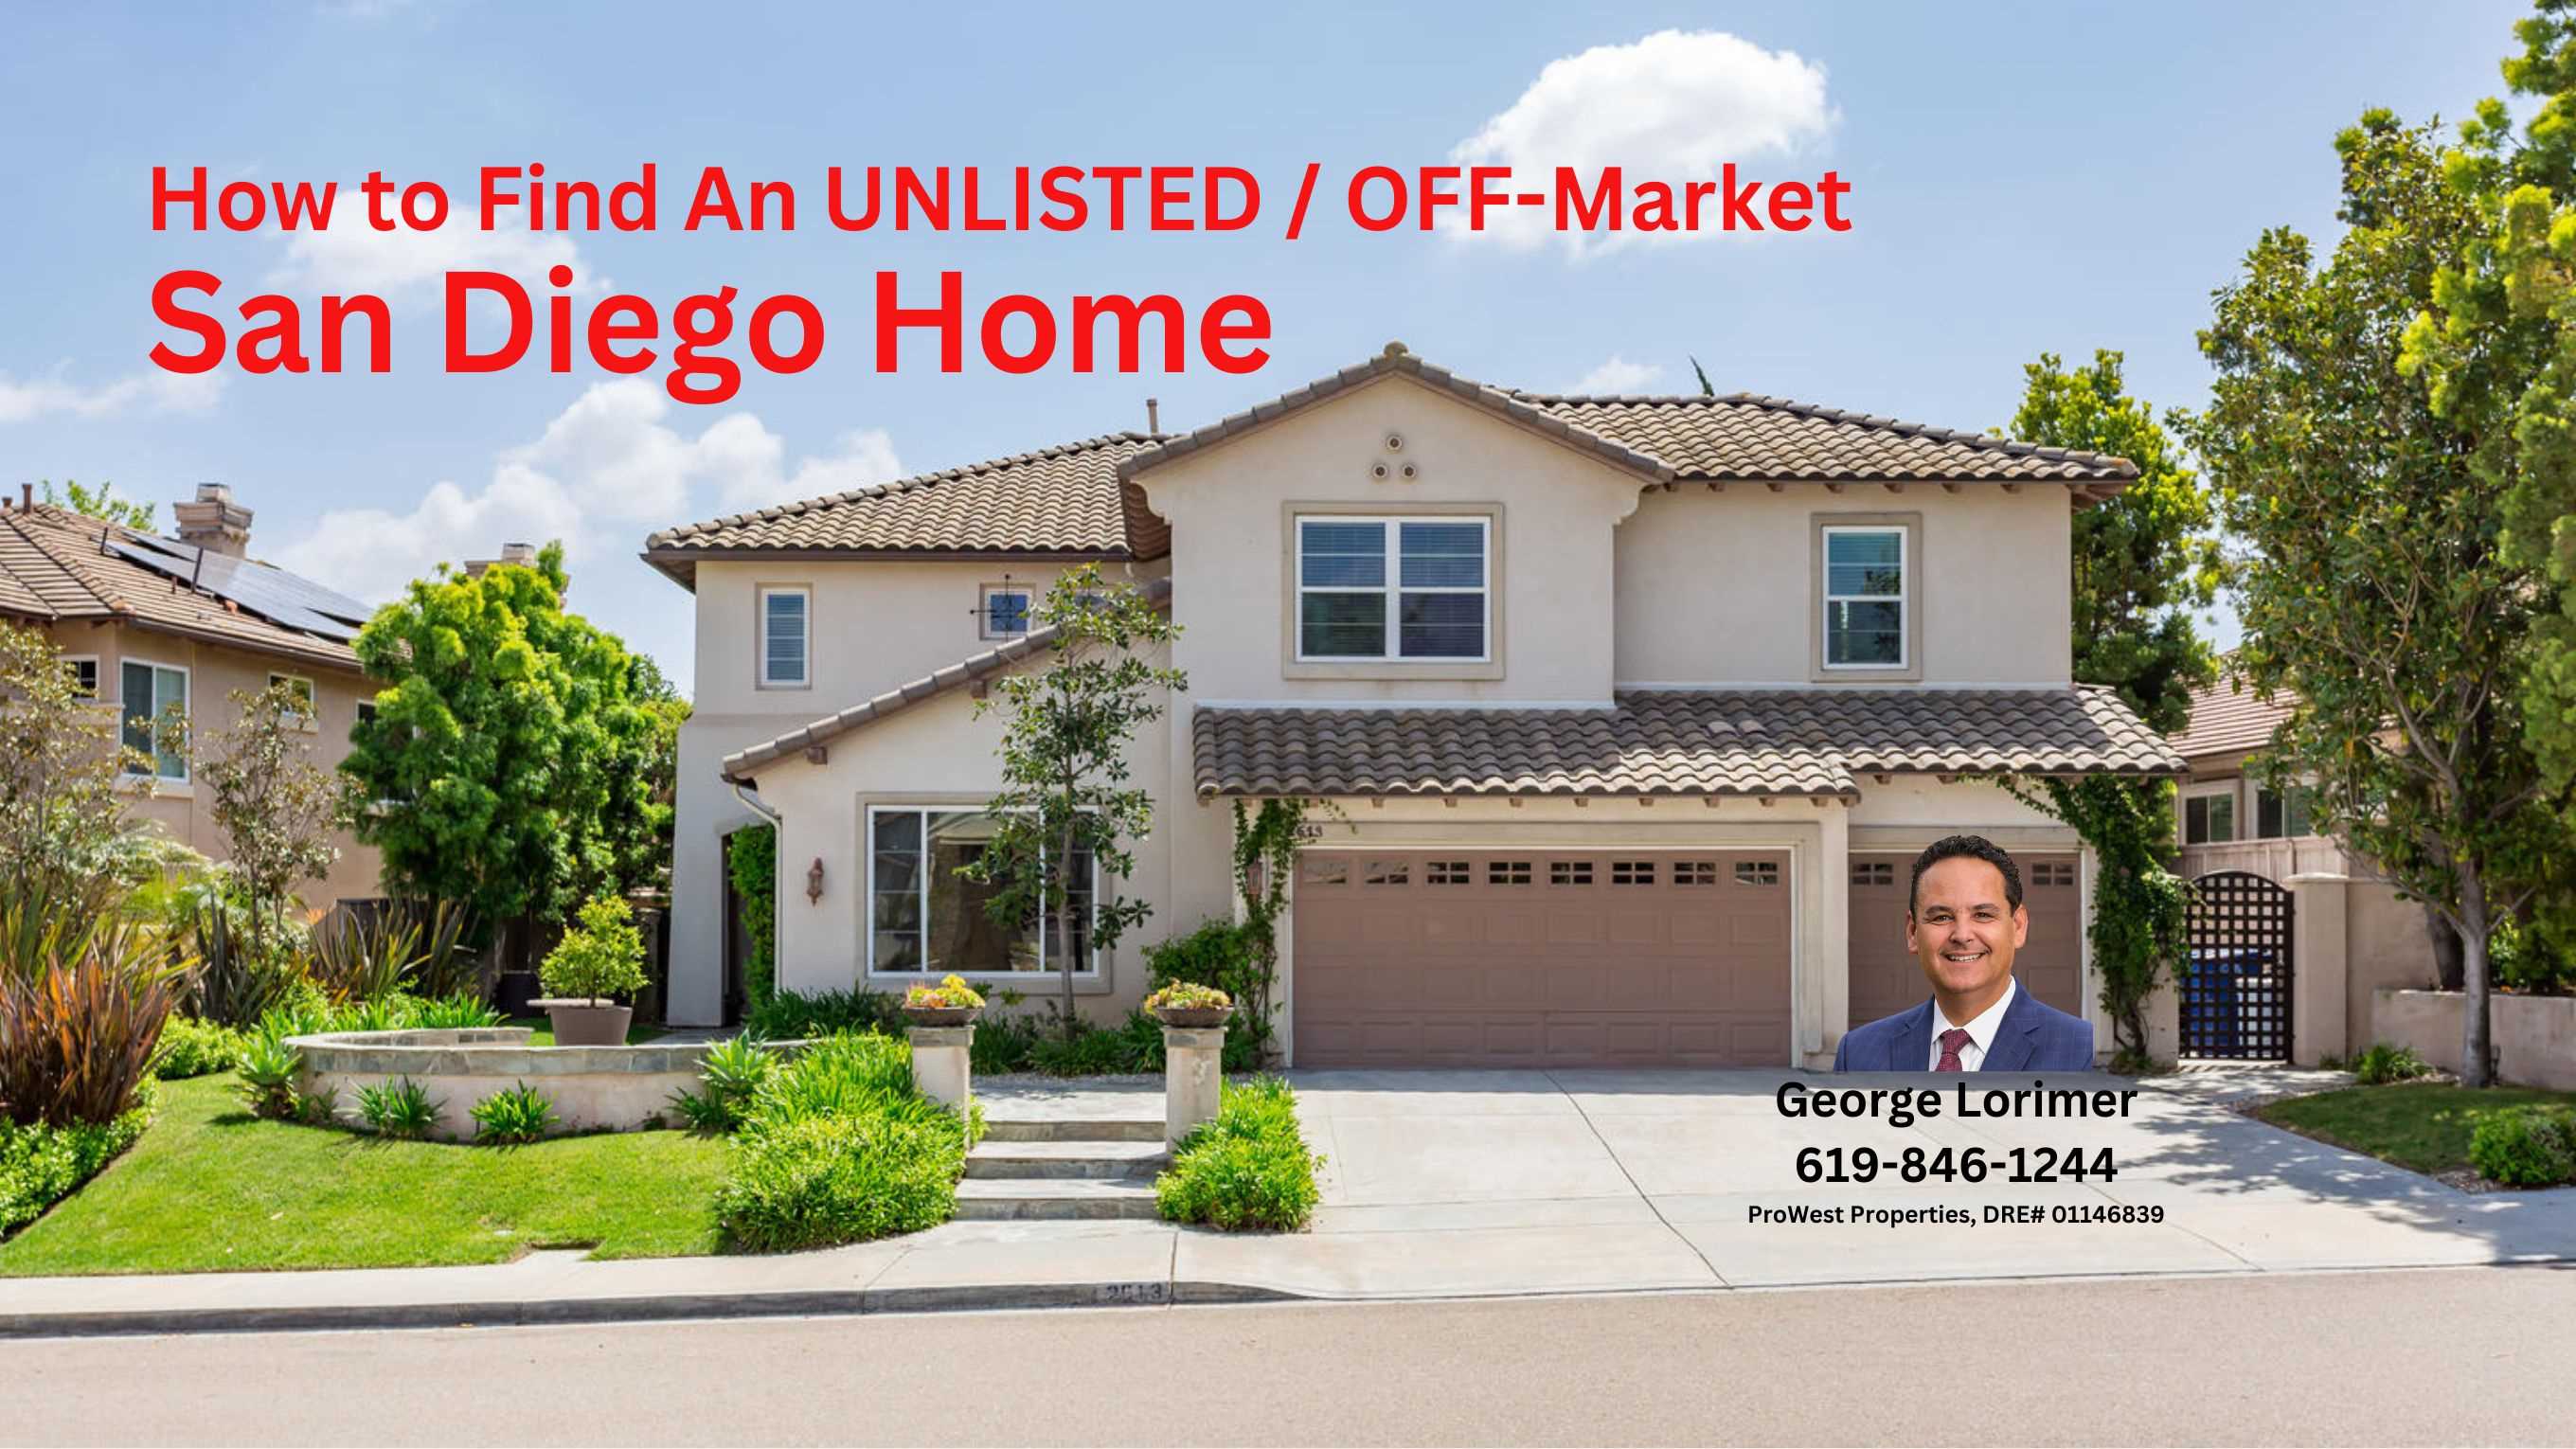 Finding an UNLISTED and OFF-Market San Diego home